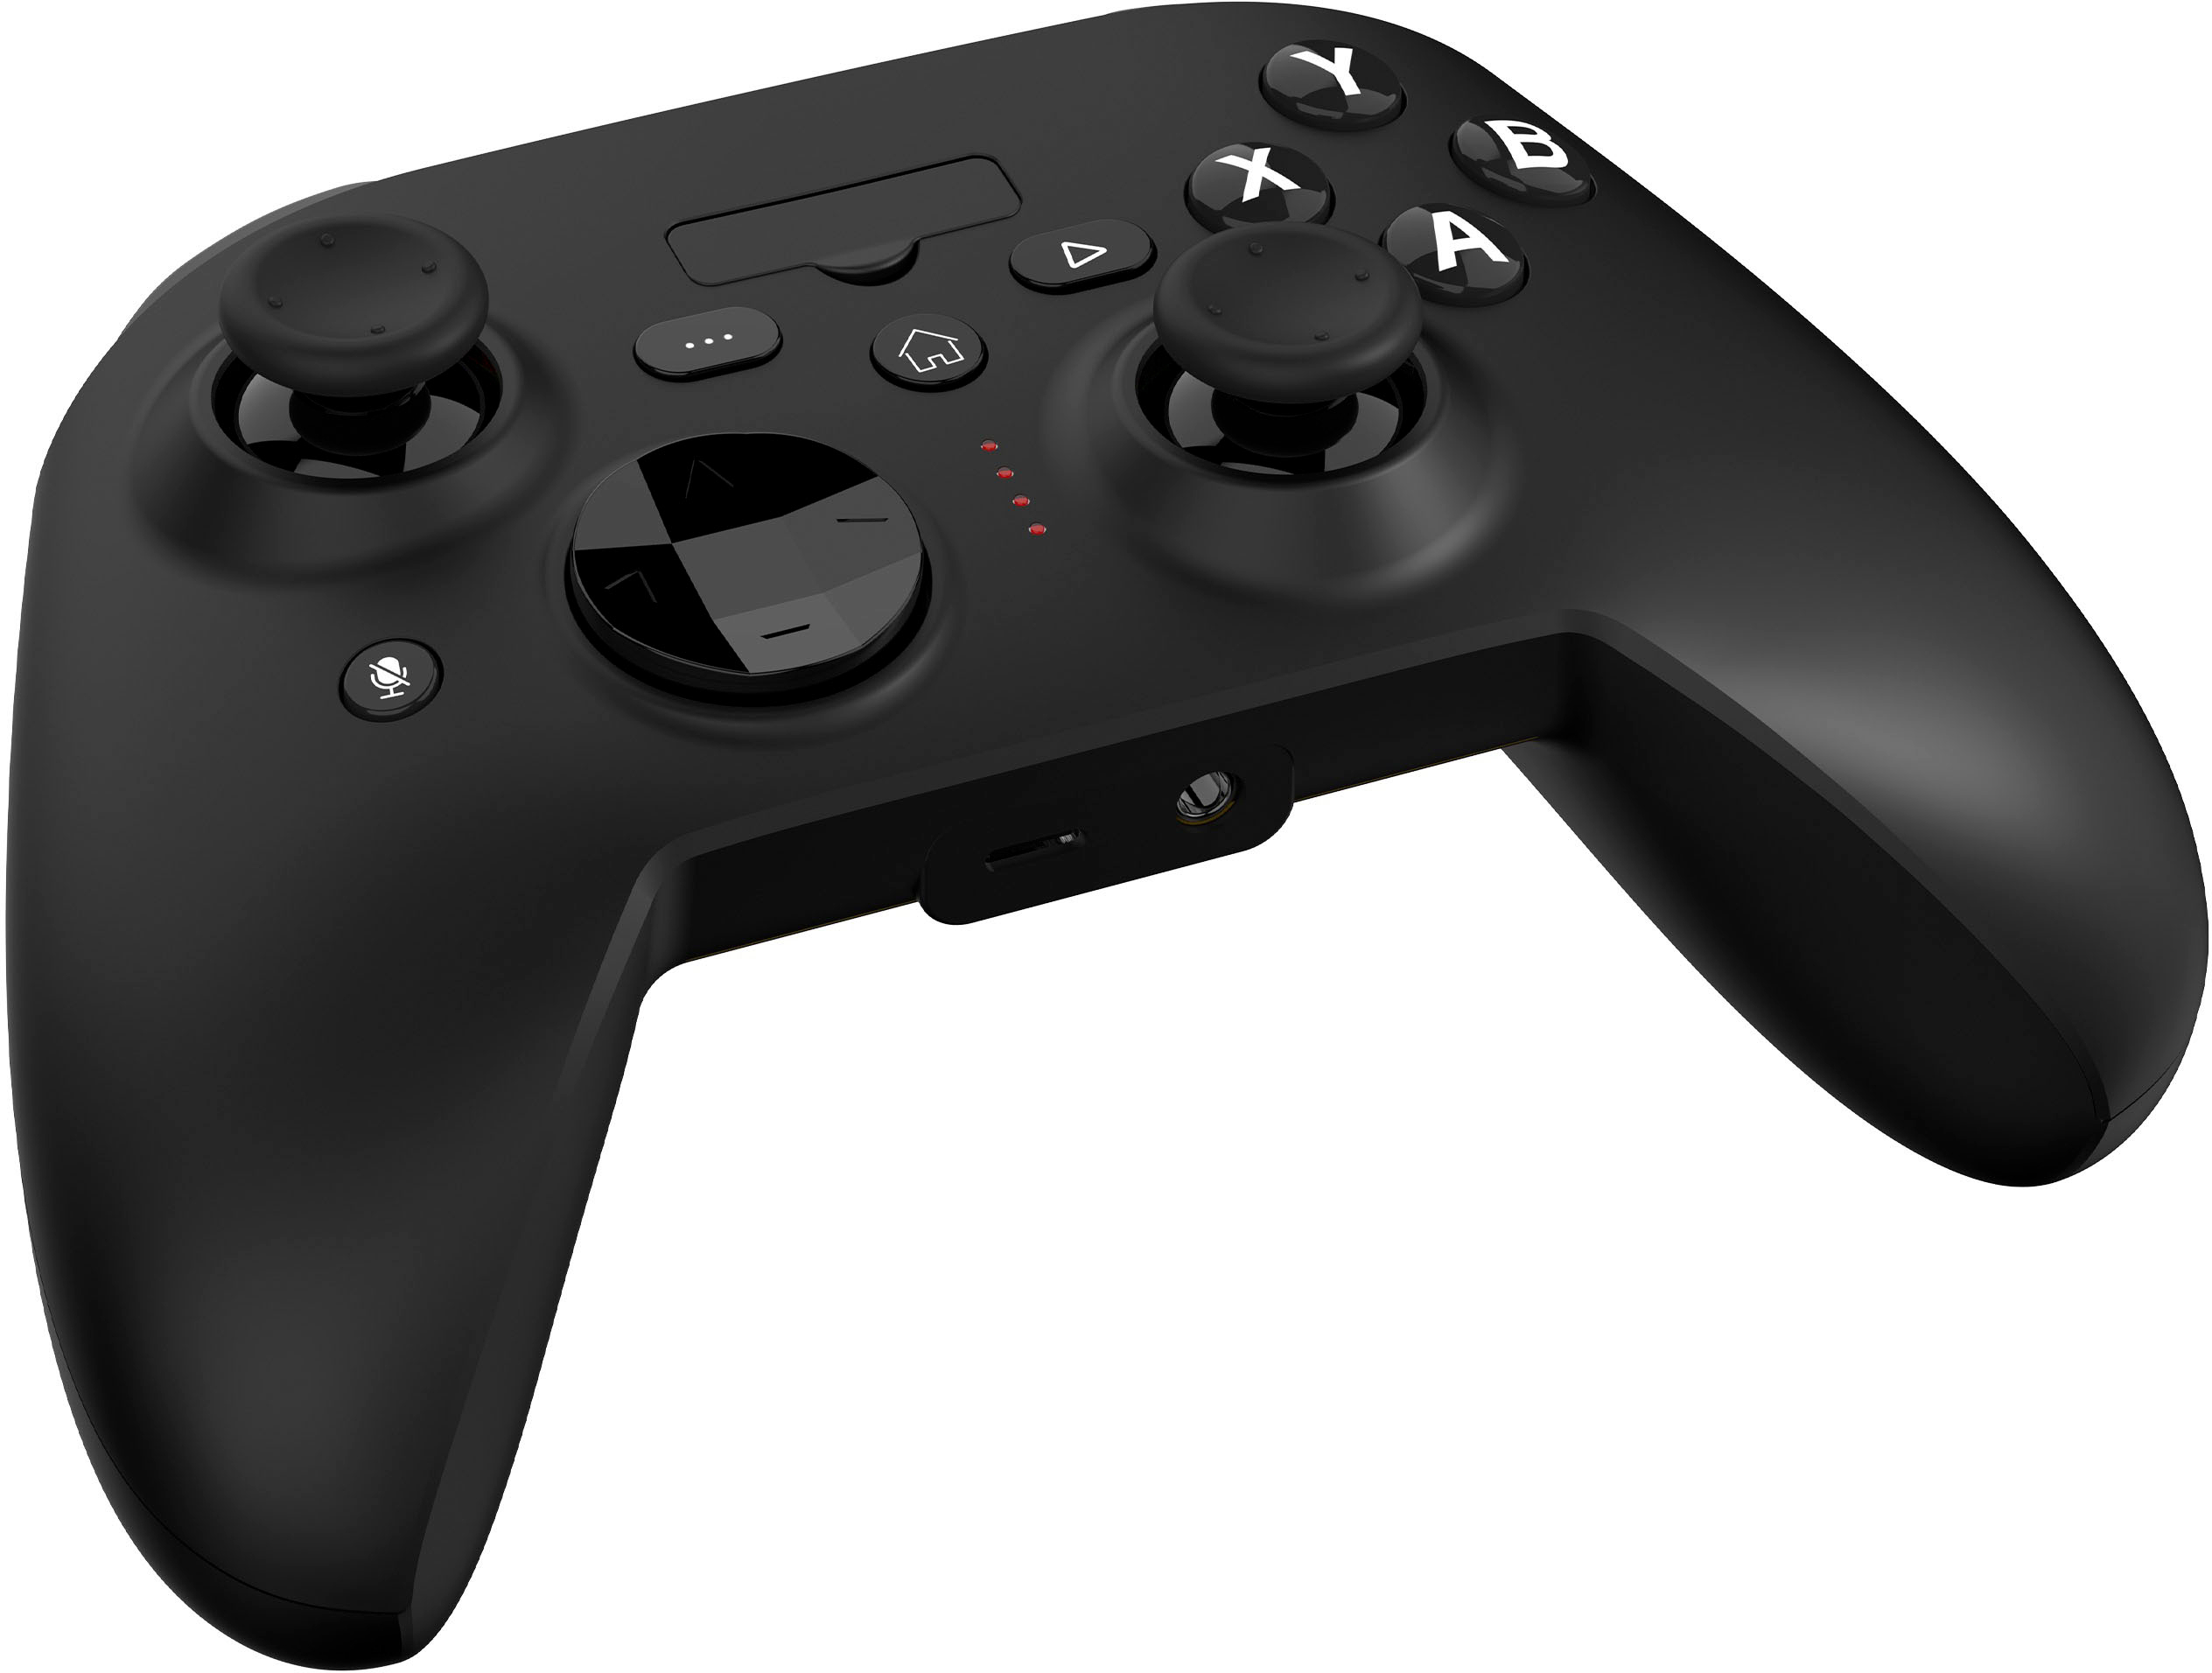  RiotPWR Mobile Cloud Gaming Controller for iOS